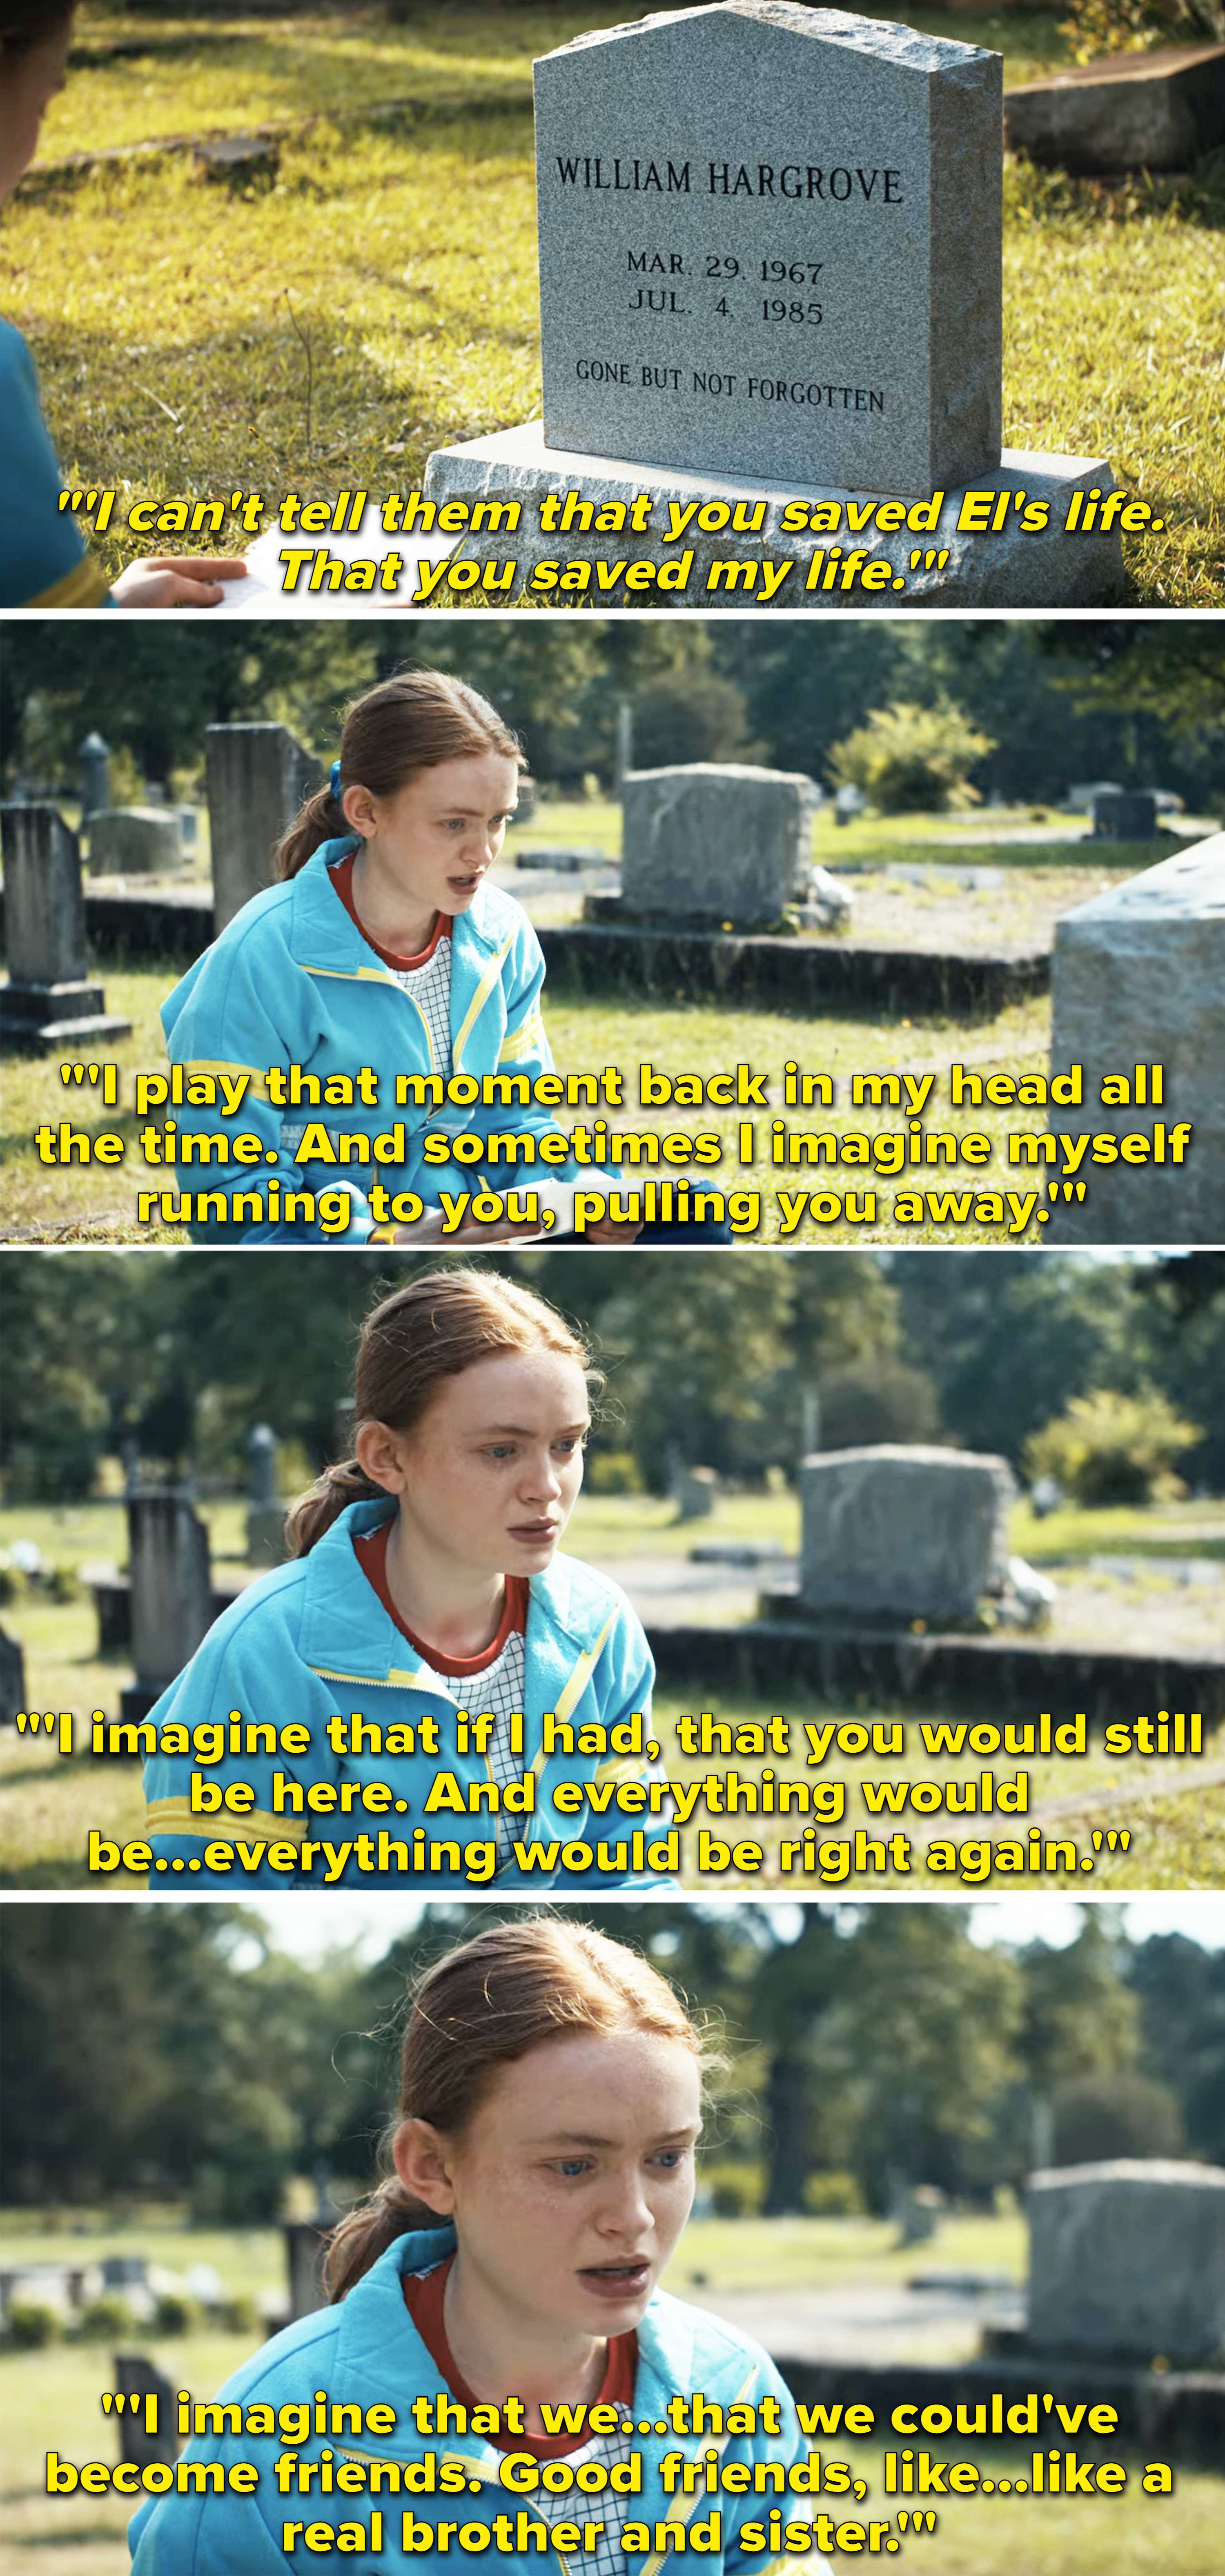 Max giving a speech at her brother&#x27;s grave, saying she imagines herself saving his life and them becoming friends, like a real brother and sister